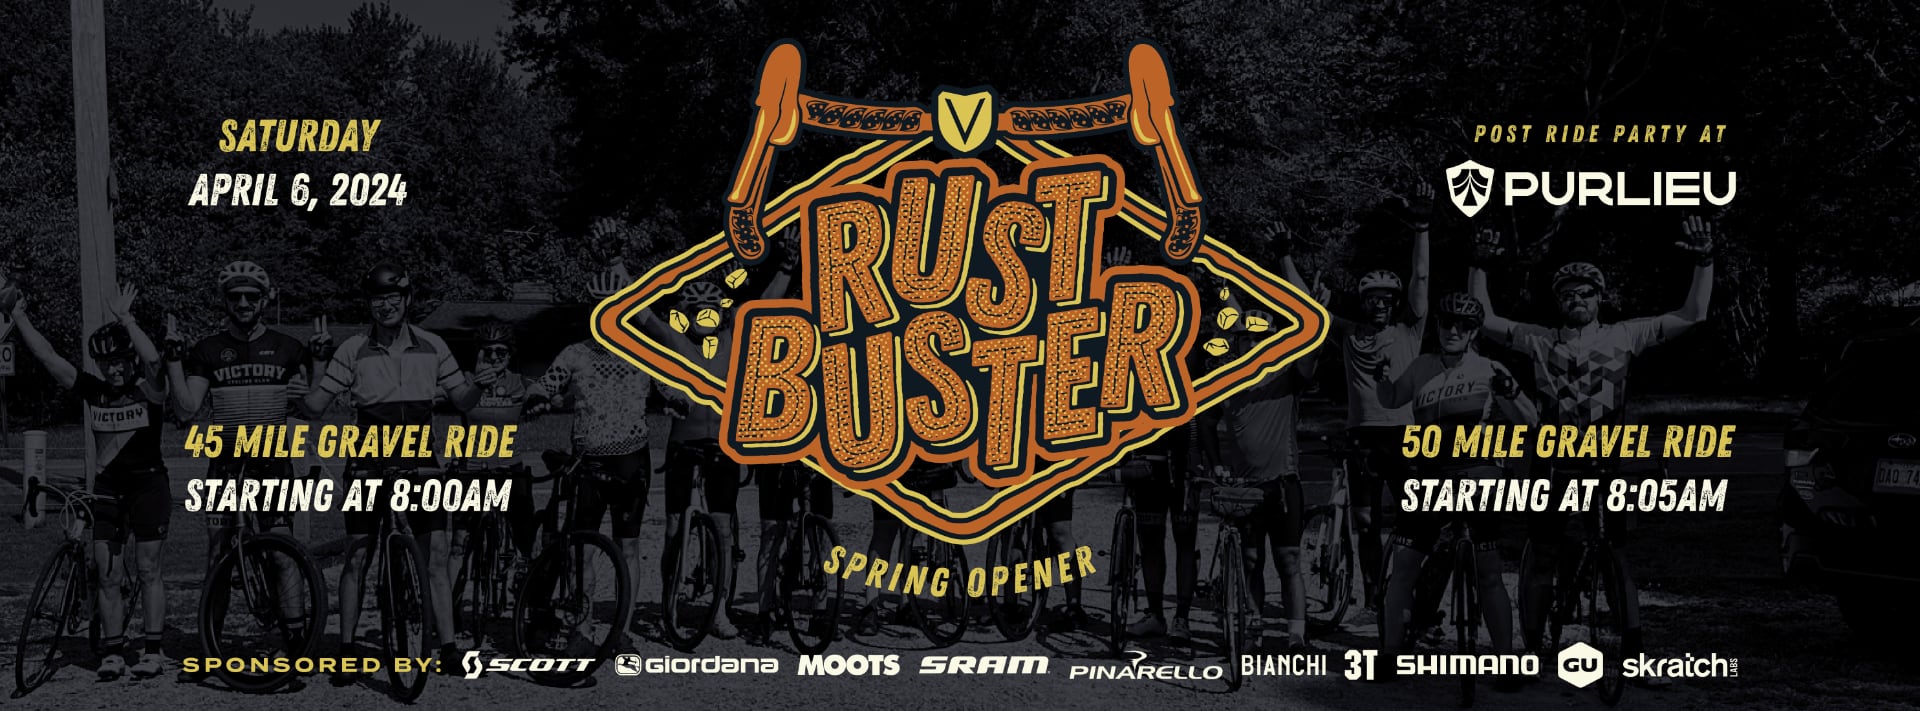 Rust Busters Banner Image with Event Details